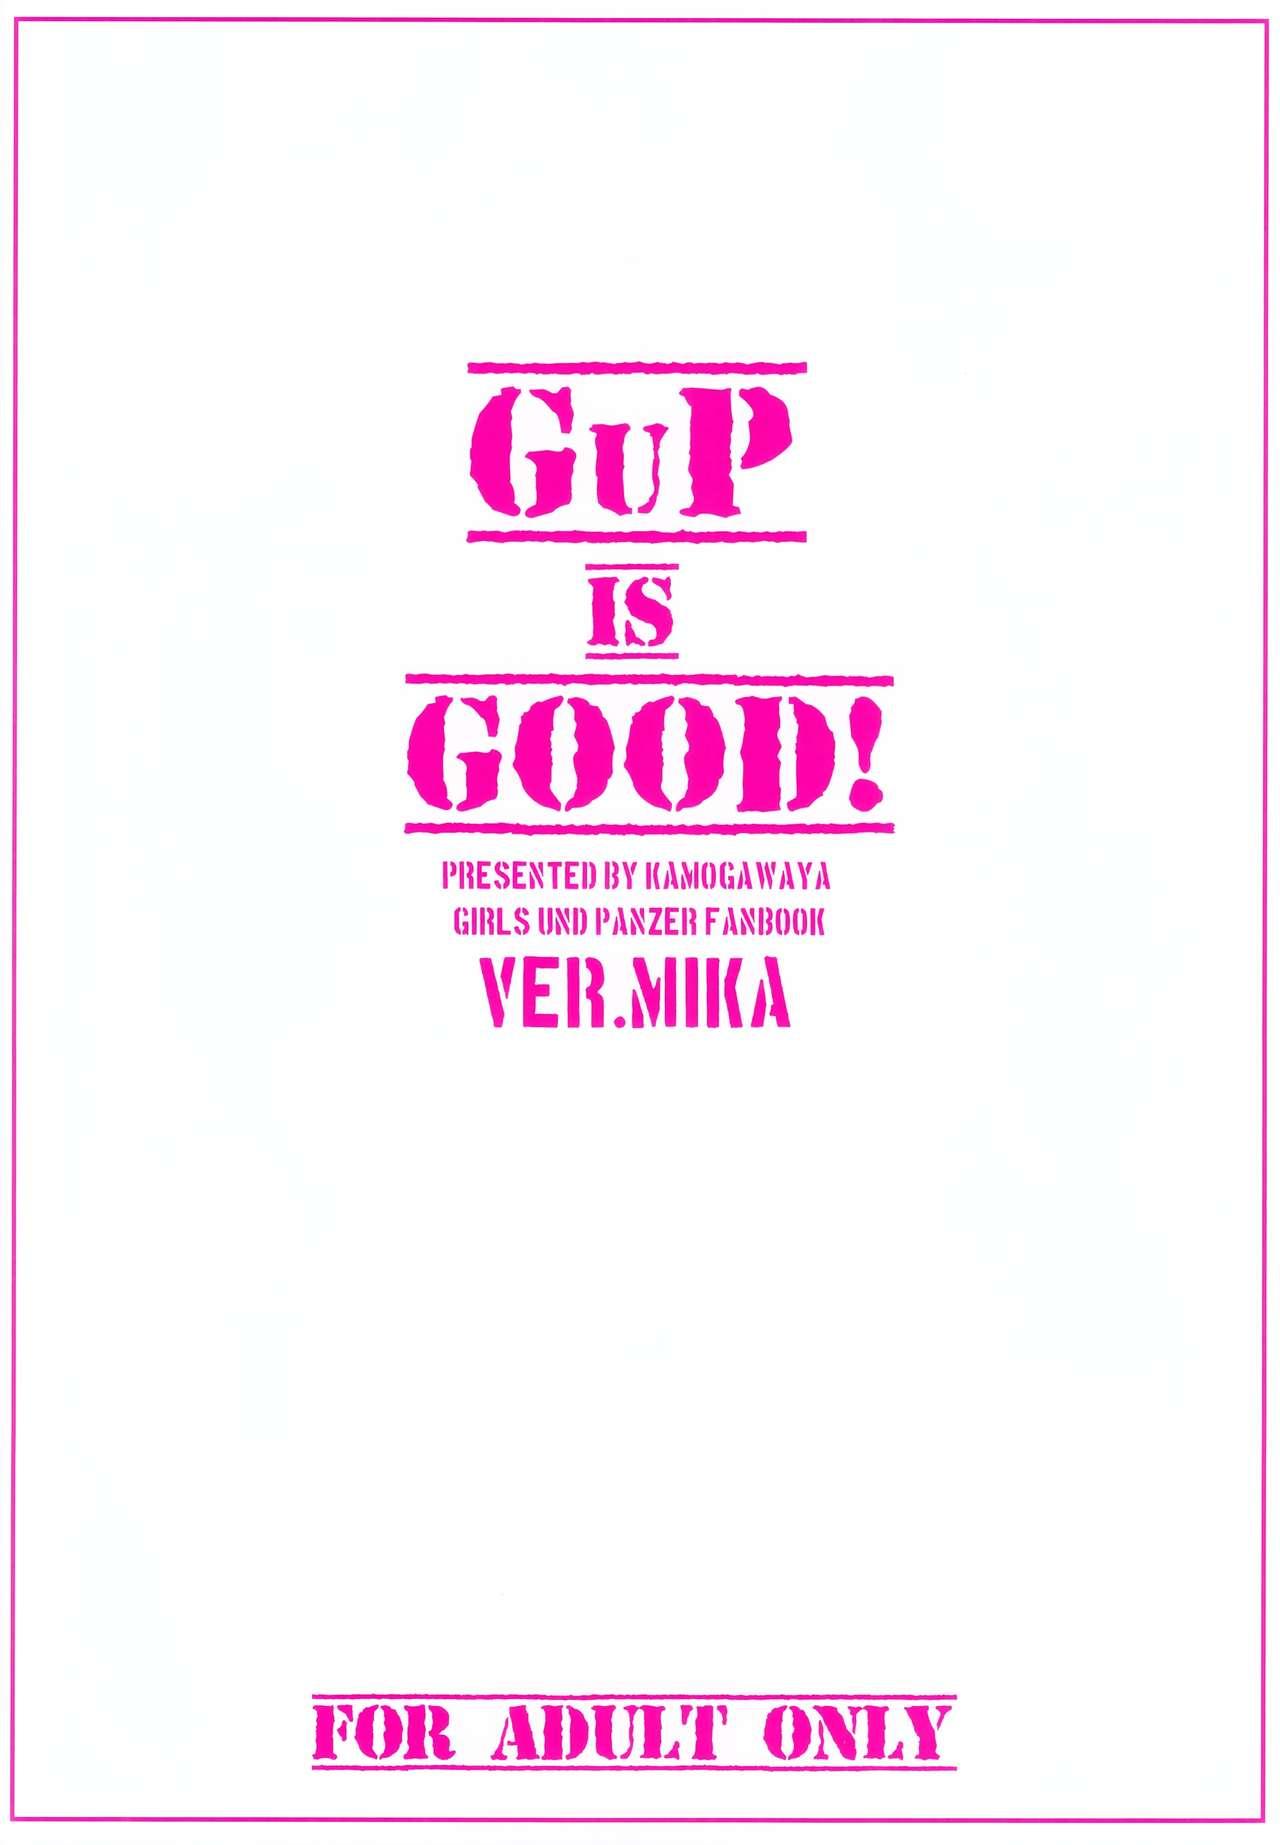 GuP is good! ver.MIKA 18